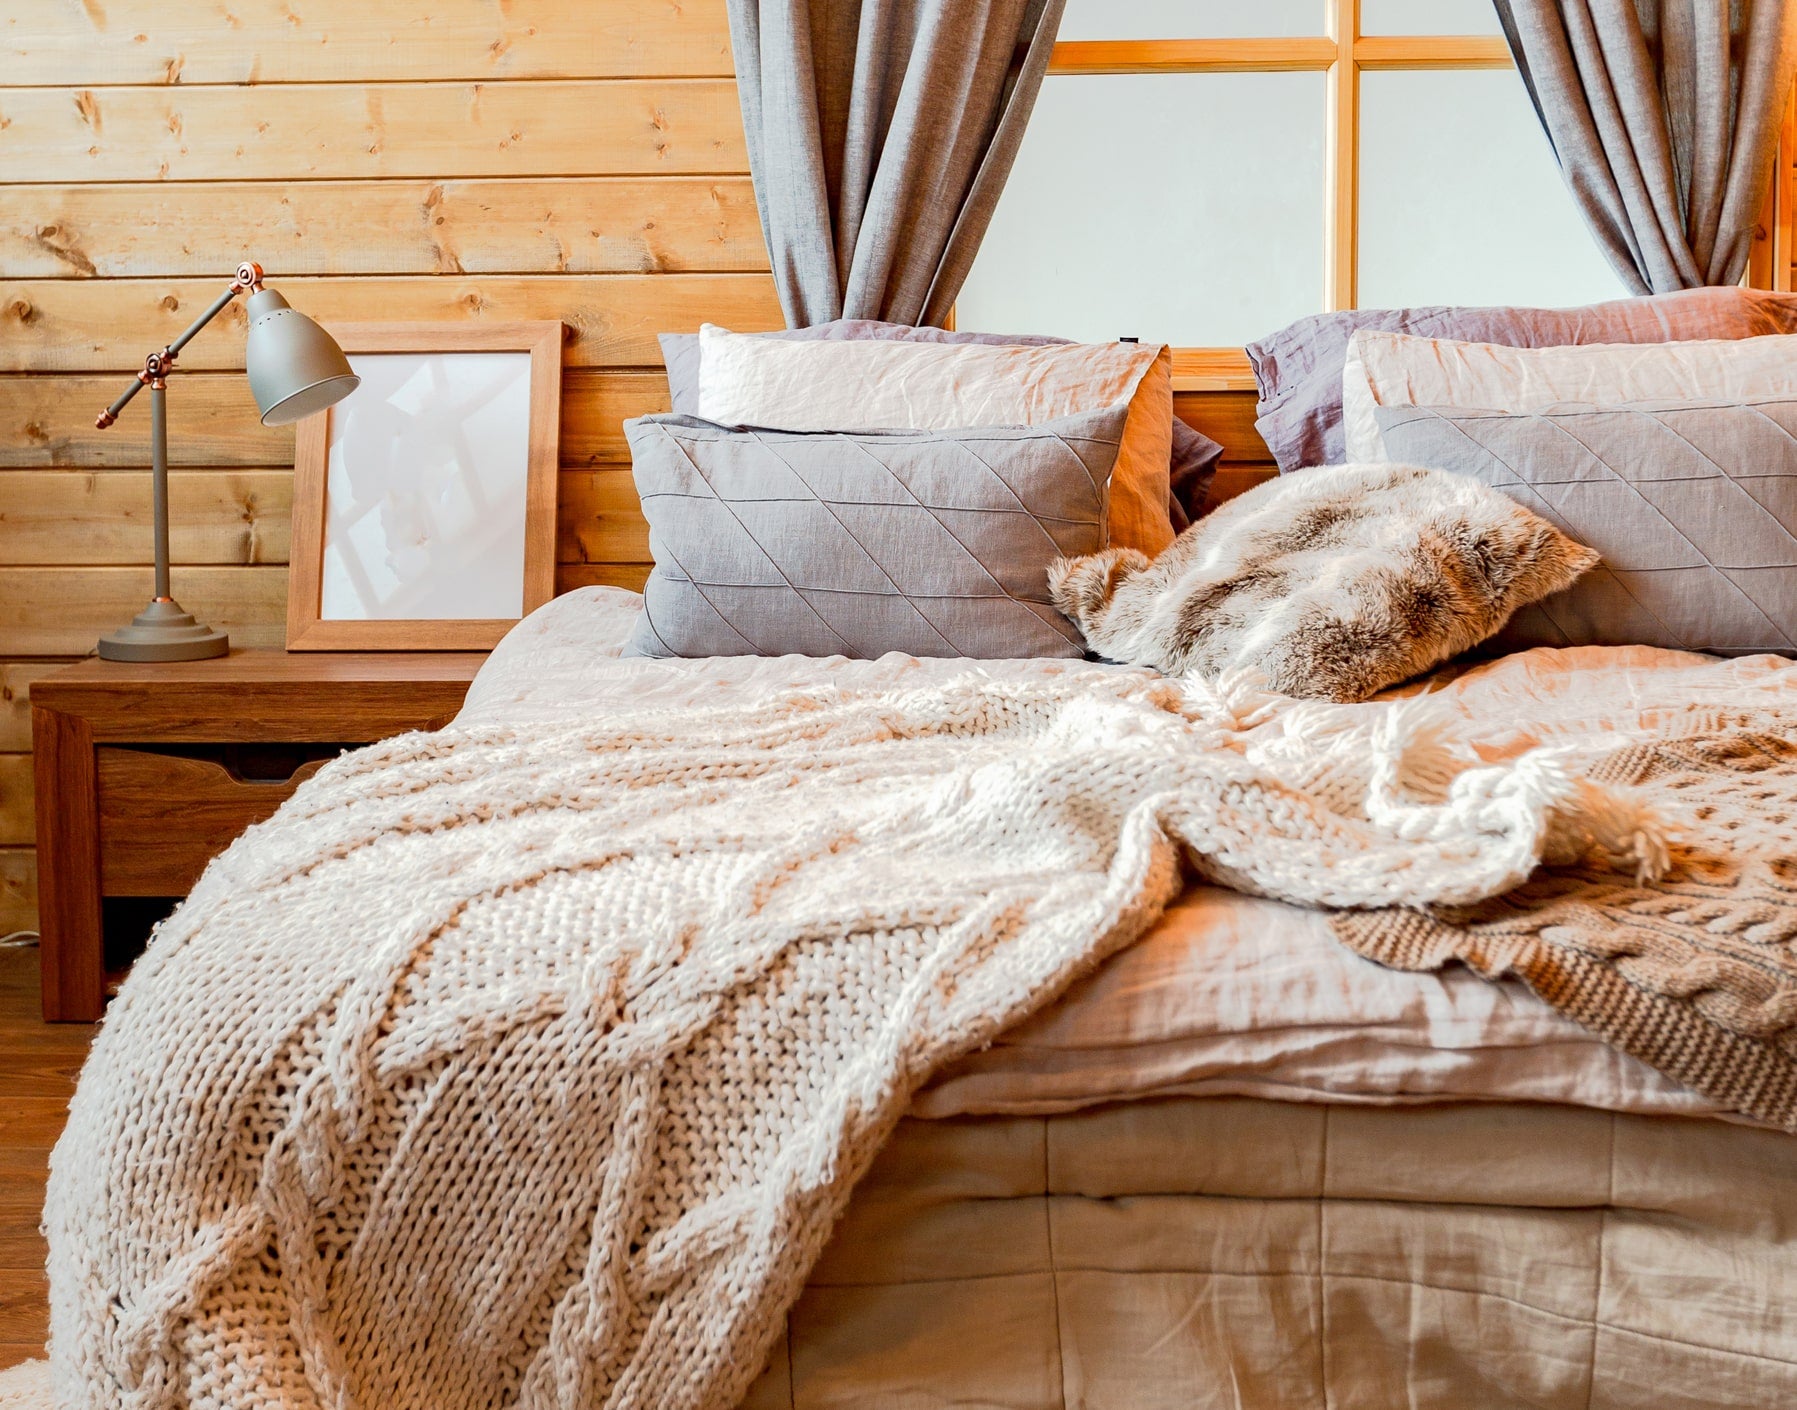 cozy wooden interior country house with layered textiles cable knit blanket min